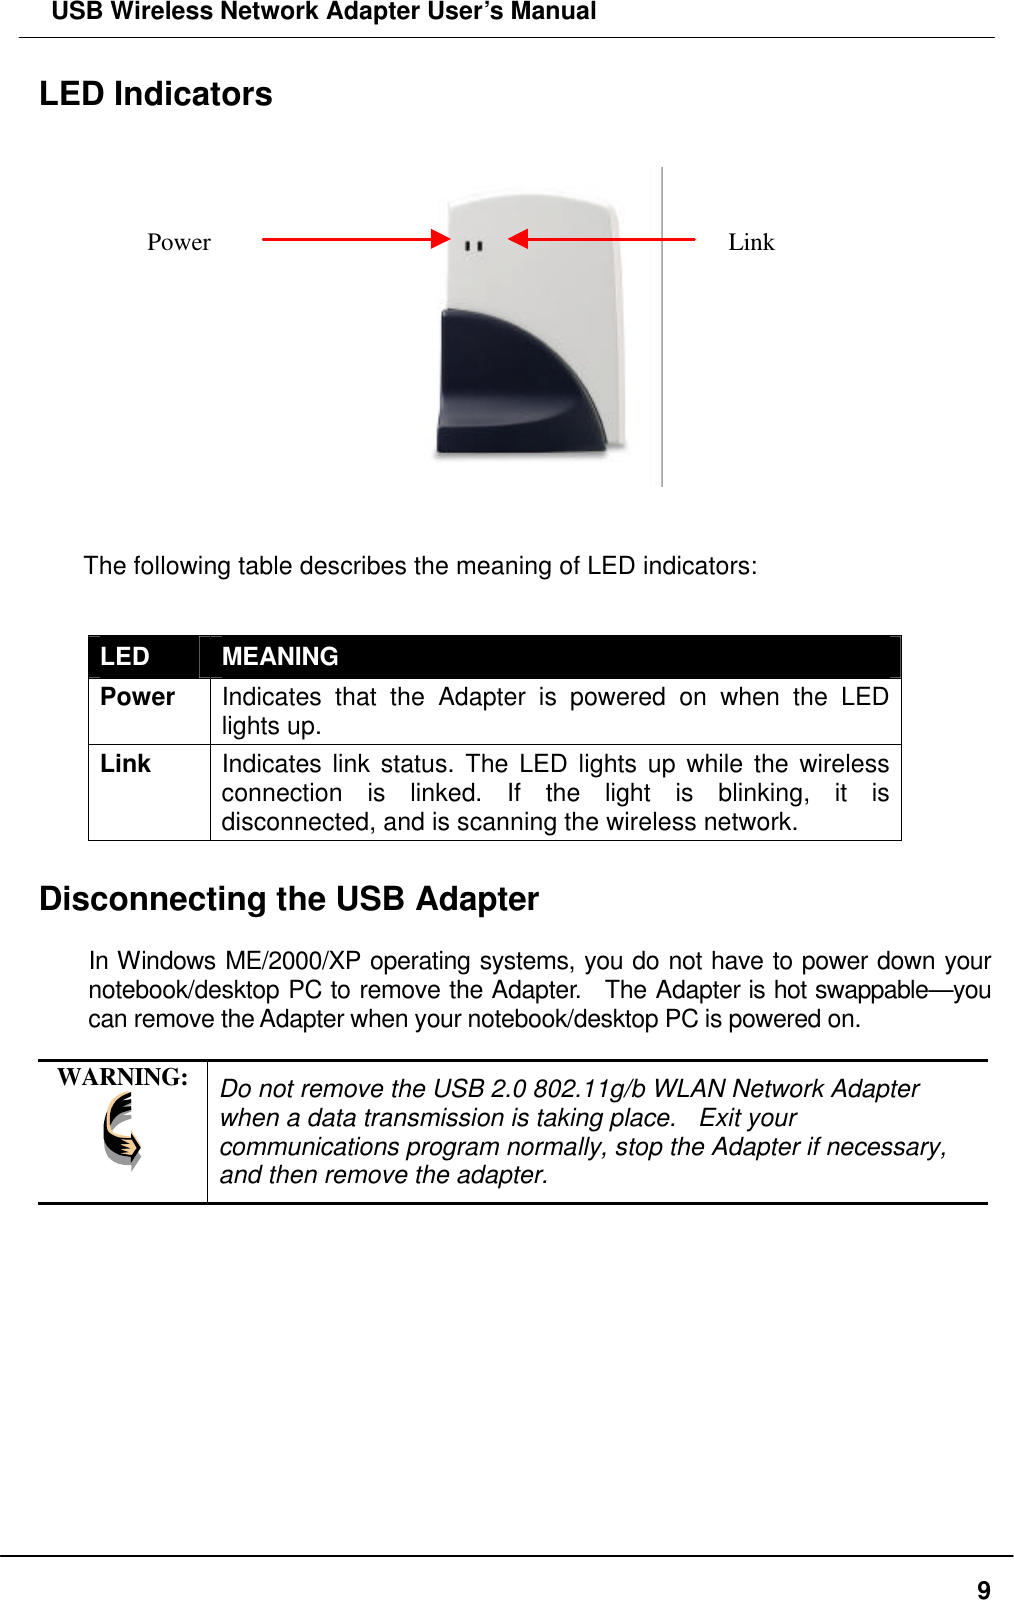  USB Wireless Network Adapter User’s Manual  9LED Indicators                                        The following table describes the meaning of LED indicators:  LED MEANING Power Indicates that the Adapter is powered on when the LED lights up. Link Indicates link status. The LED lights up while the wireless connection is linked. If the light is blinking, it is disconnected, and is scanning the wireless network.  Disconnecting the USB Adapter  In Windows ME/2000/XP operating systems, you do not have to power down your notebook/desktop PC to remove the Adapter.  The Adapter is hot swappable—you can remove the Adapter when your notebook/desktop PC is powered on.    WARNING:  Do not remove the USB 2.0 802.11g/b WLAN Network Adapter when a data transmission is taking place.  Exit your communications program normally, stop the Adapter if necessary, and then remove the adapter.  Power Link 